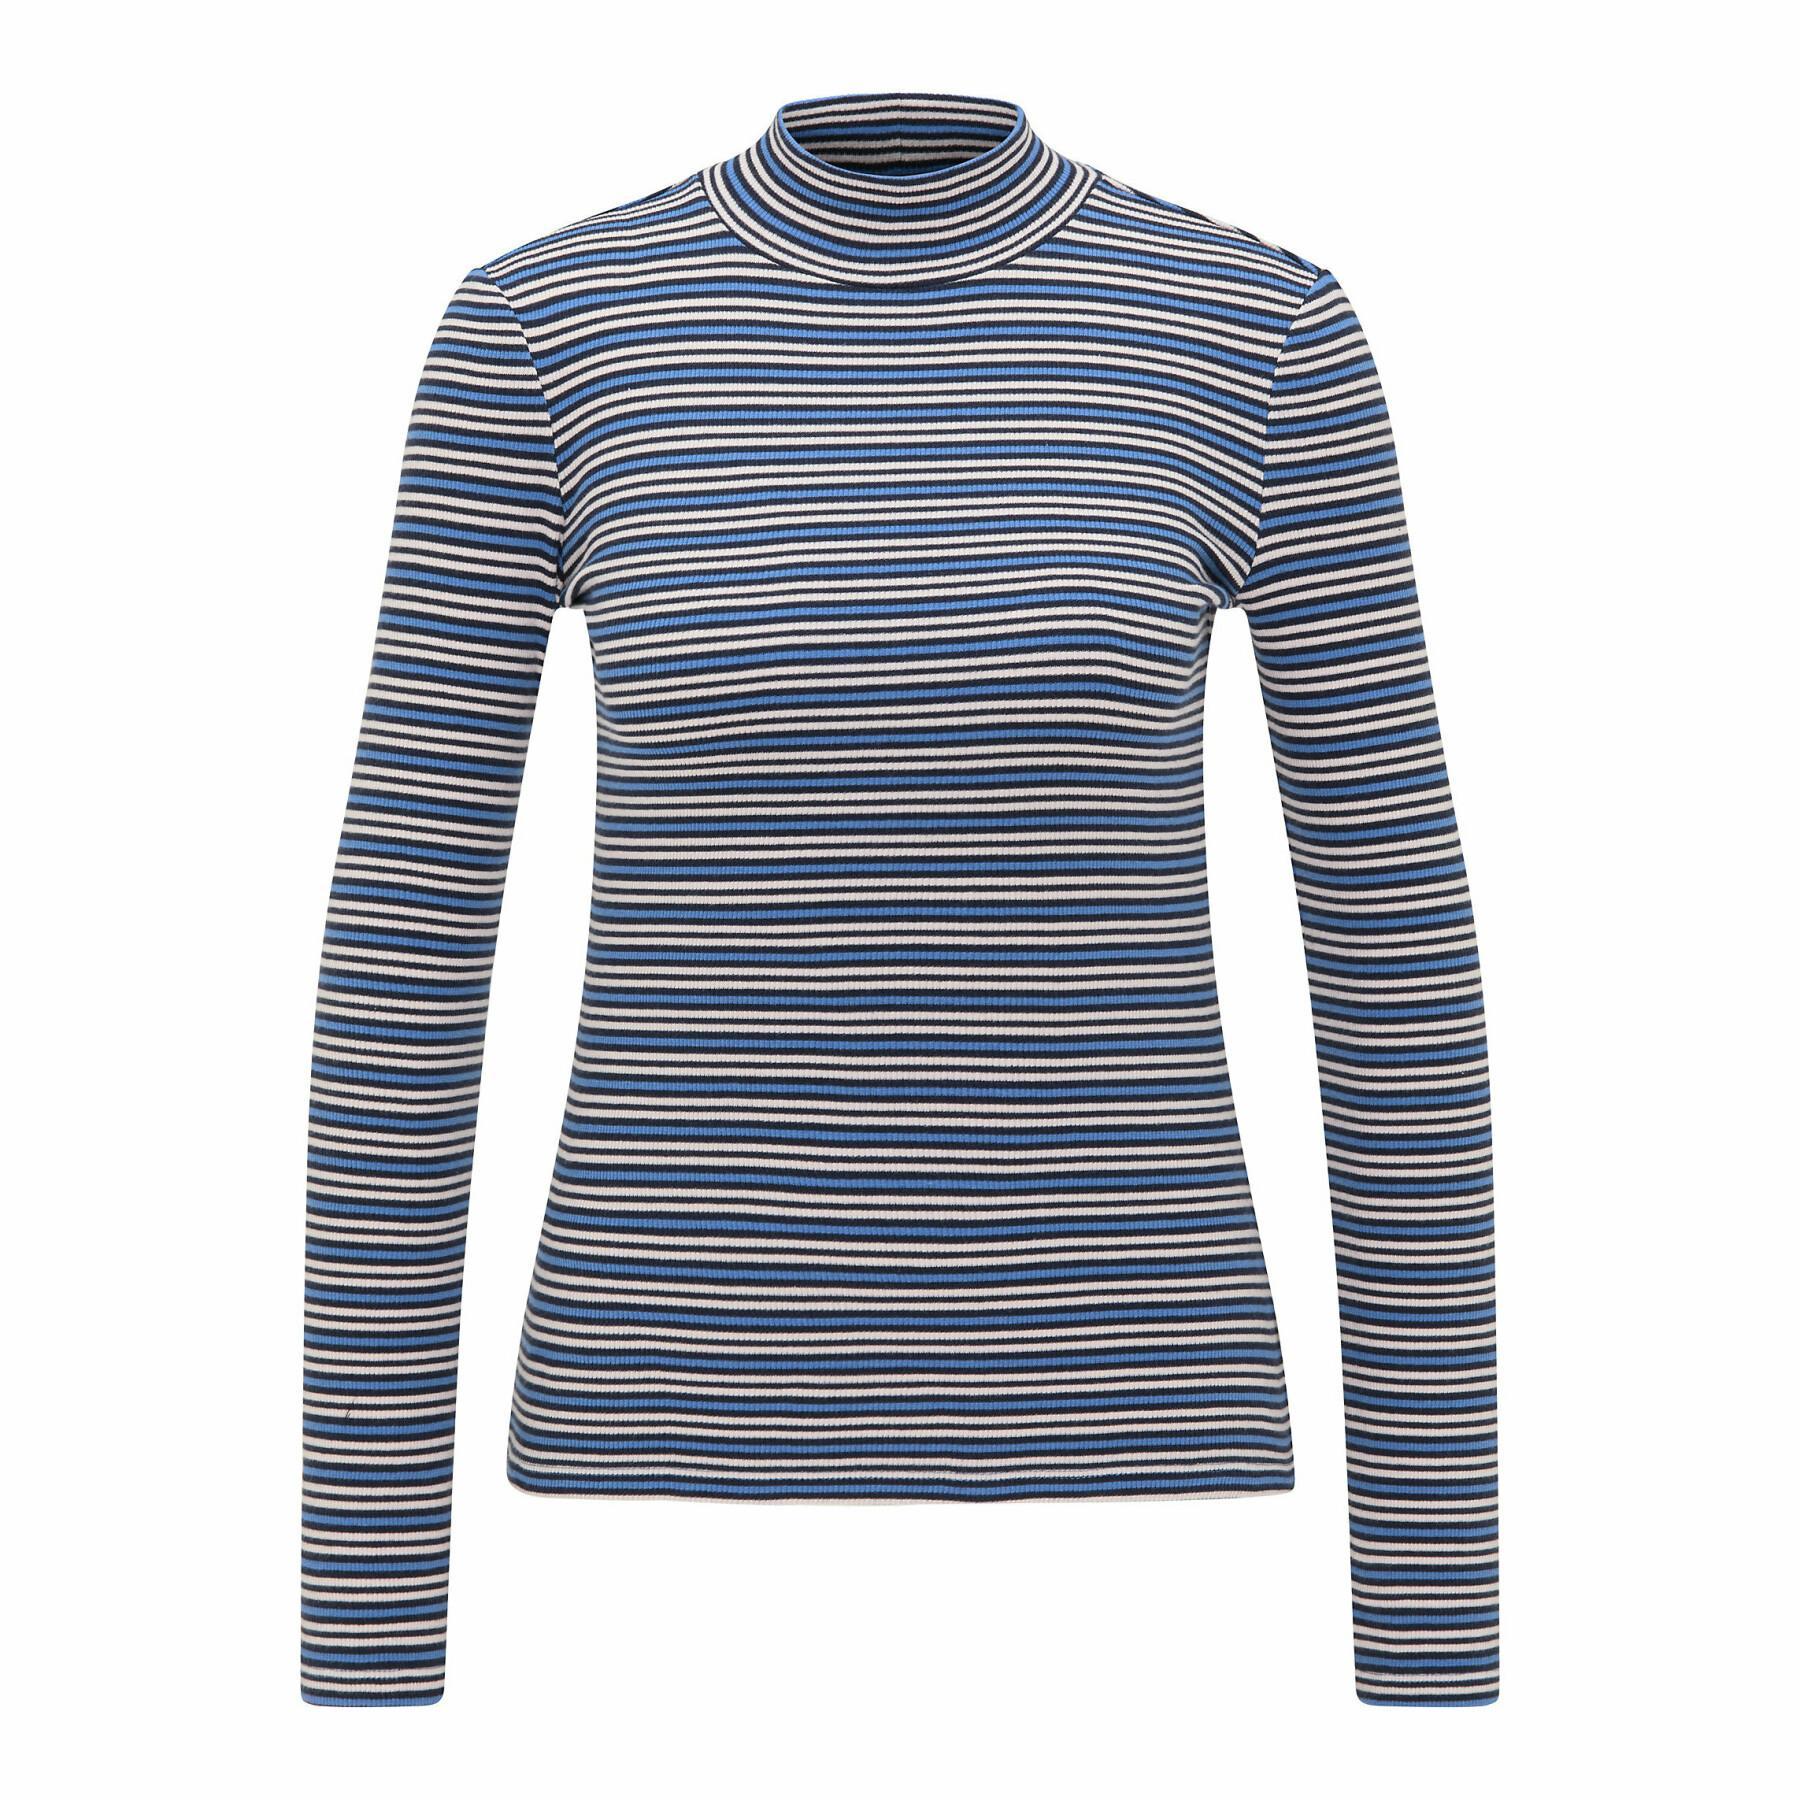 Women's T-shirt Lee Ribbed Ls Stripped